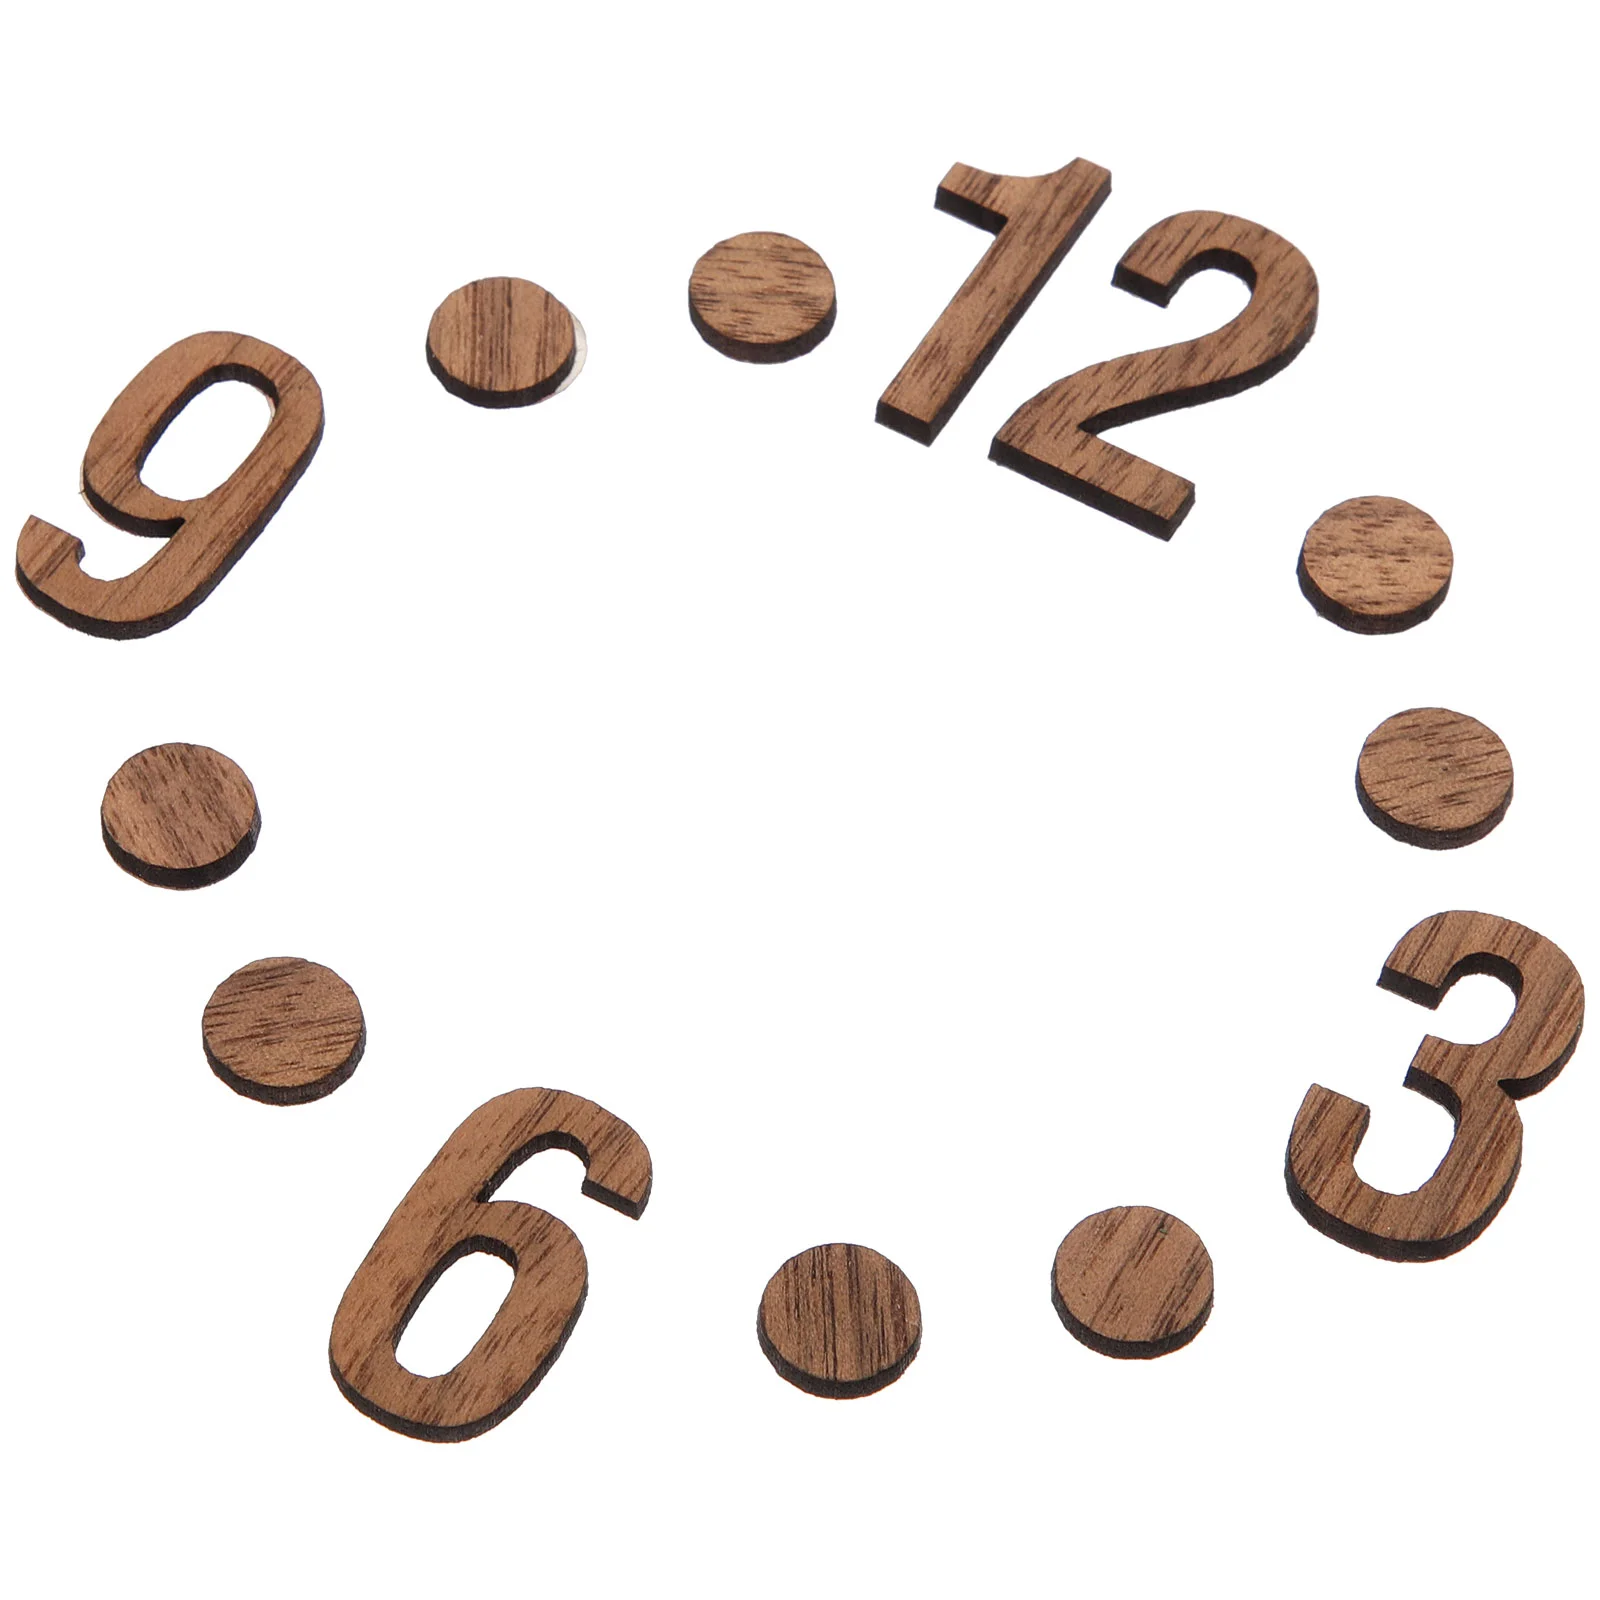 Clock Digital Accessories Numerals Wooden Numbers Hands Replacement Parts DIY Supplies for Hanging Wall